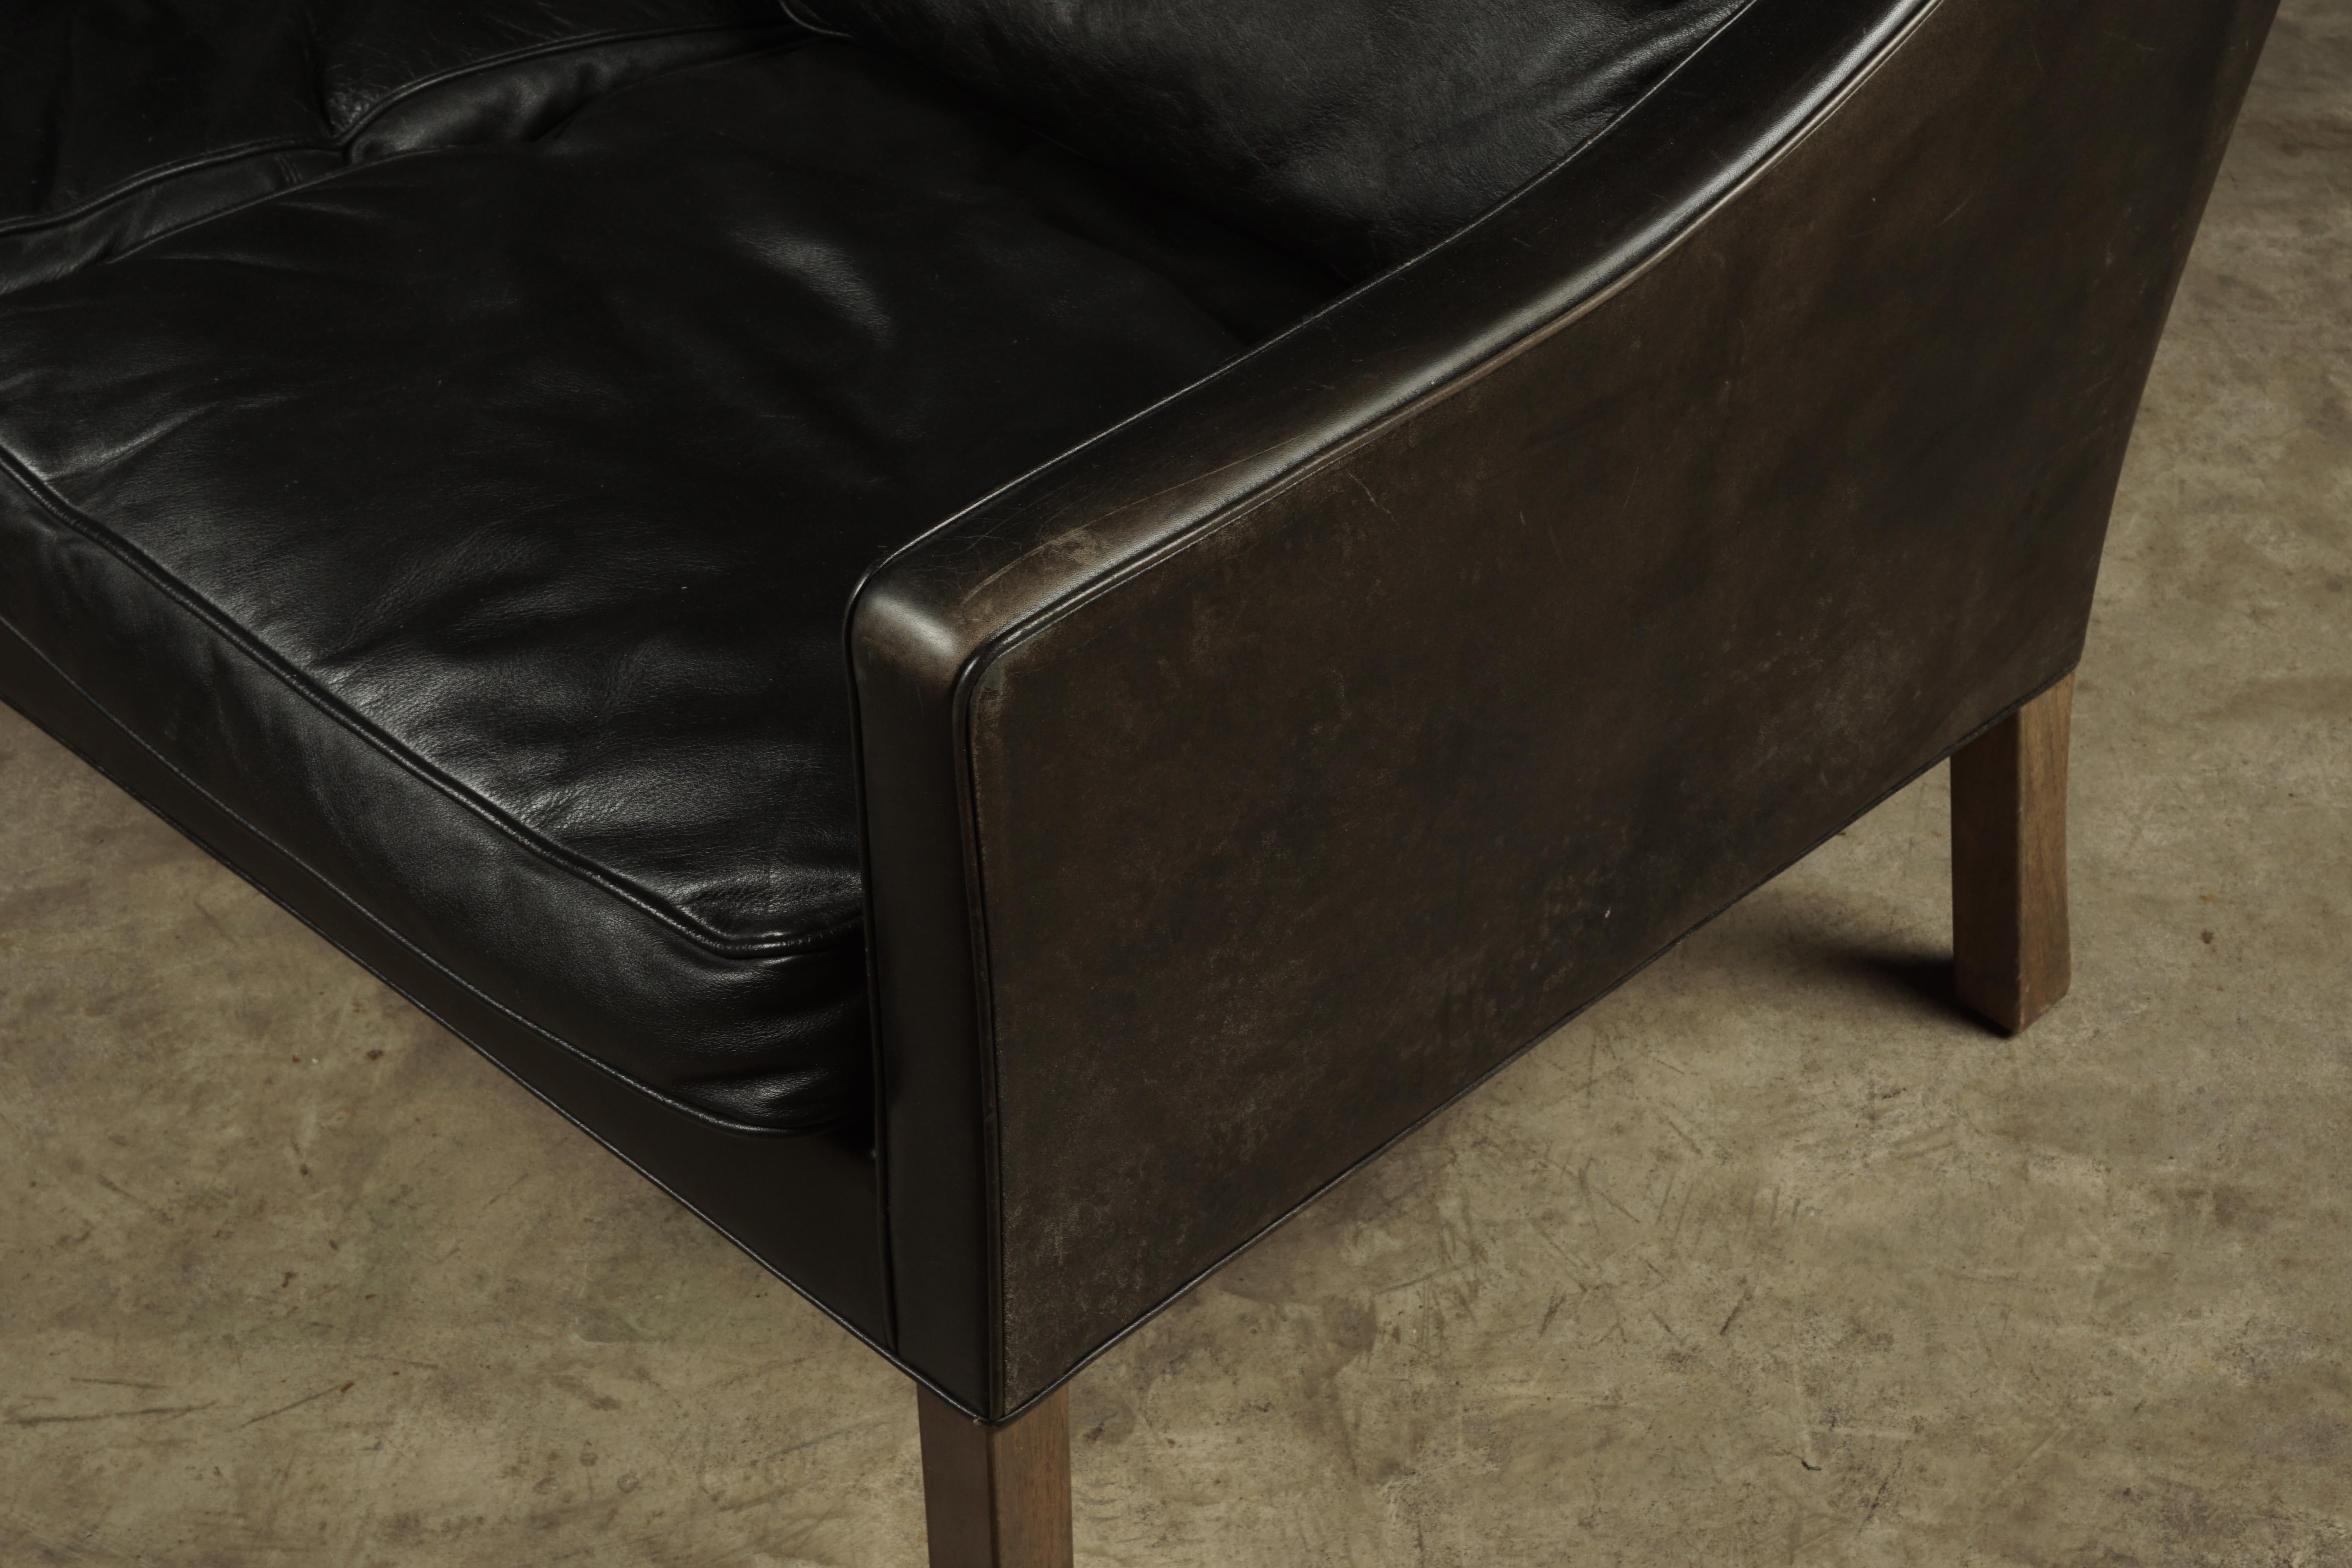 Two-seat sofa designed by Borge Mogensen, model 2209. Original black leather upholstery with nice wear and patina.